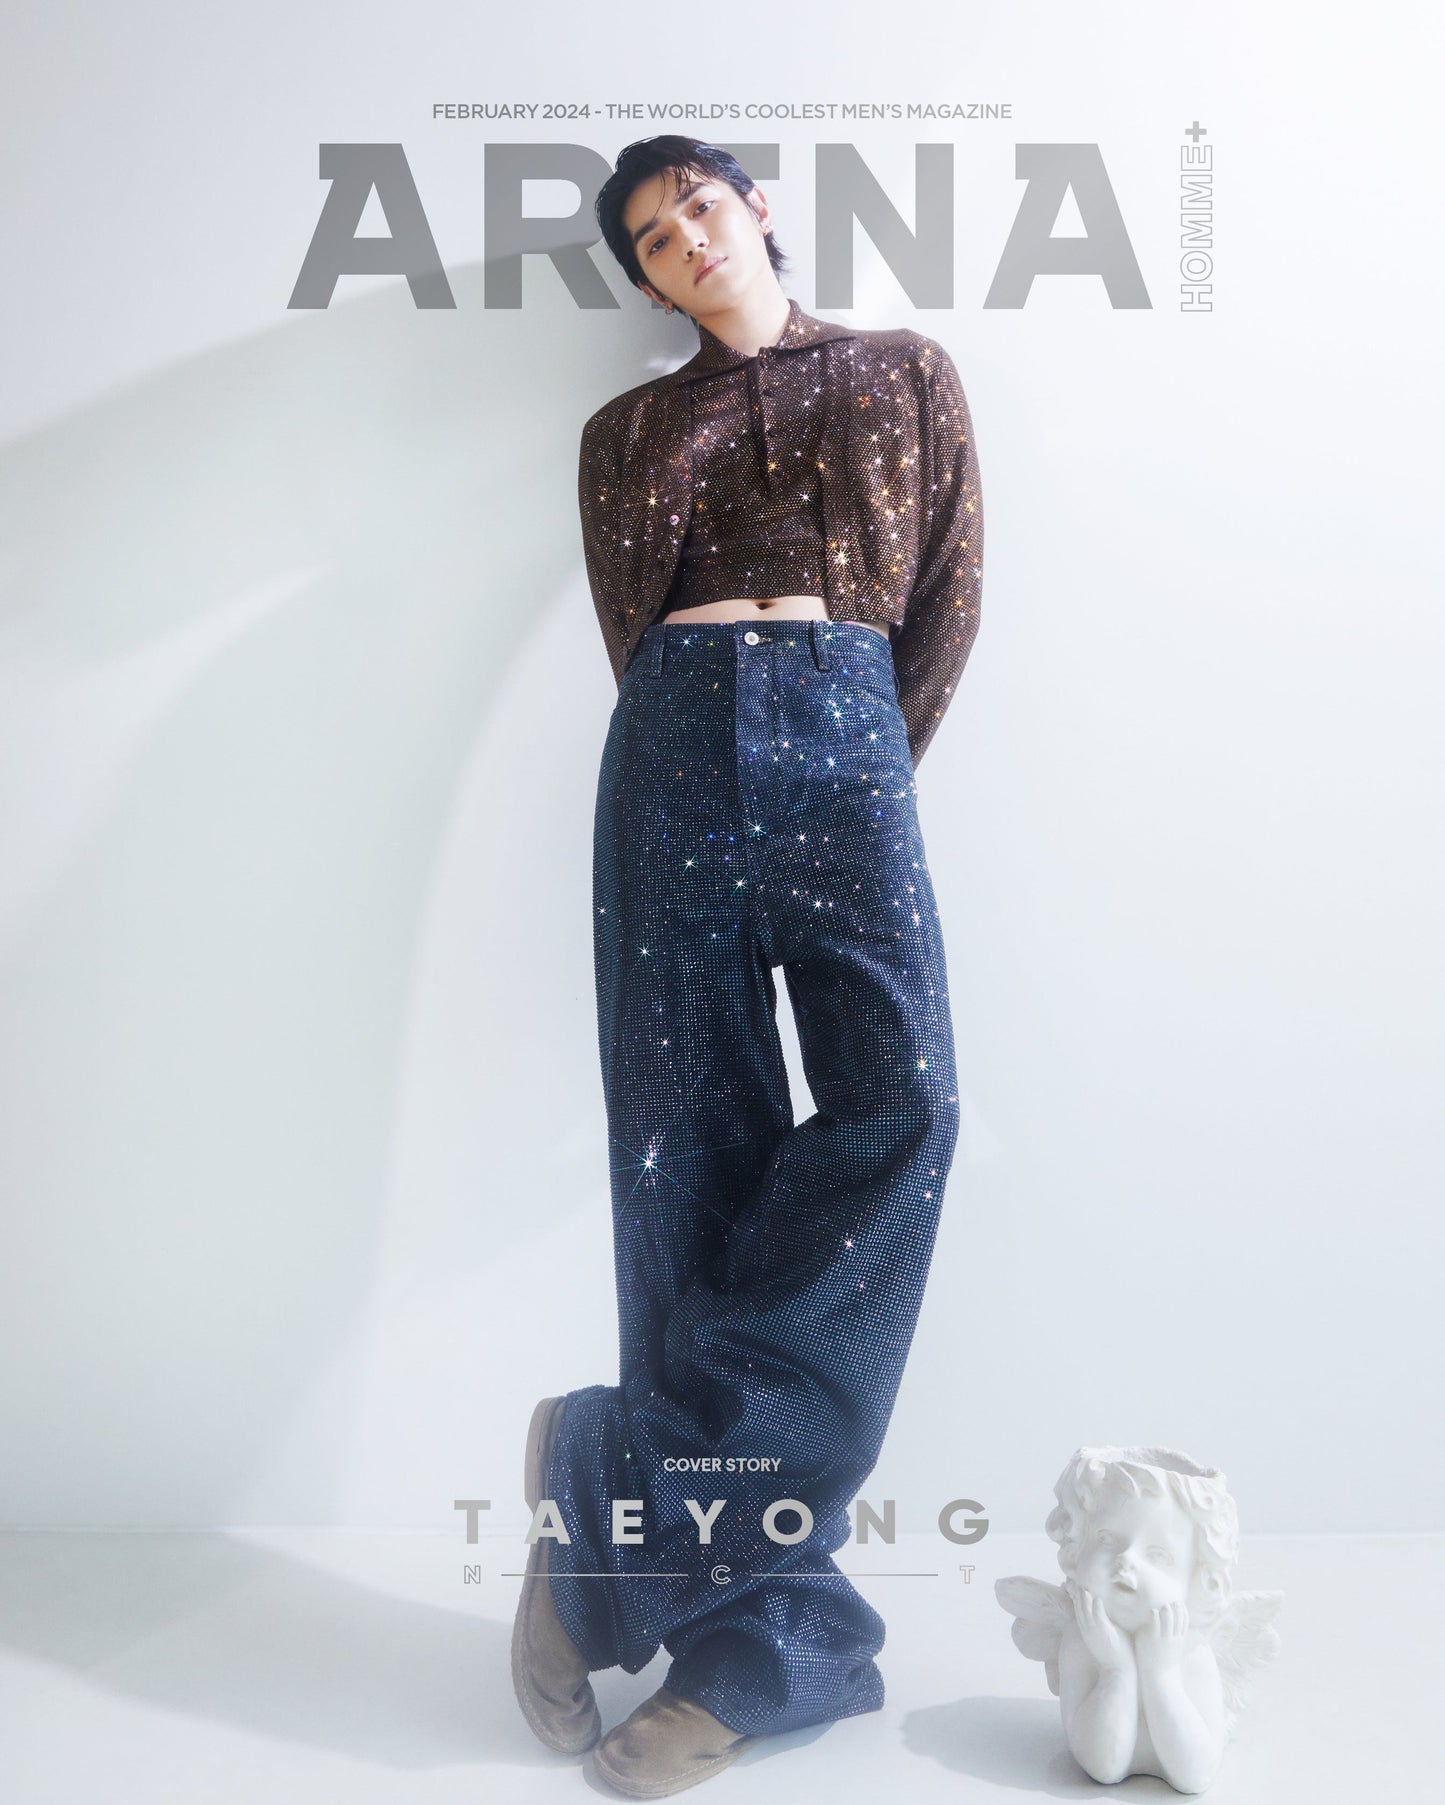 TAEYONG AERNA HOMME MAGAZINE 2024 FEBRUARY ISSUE